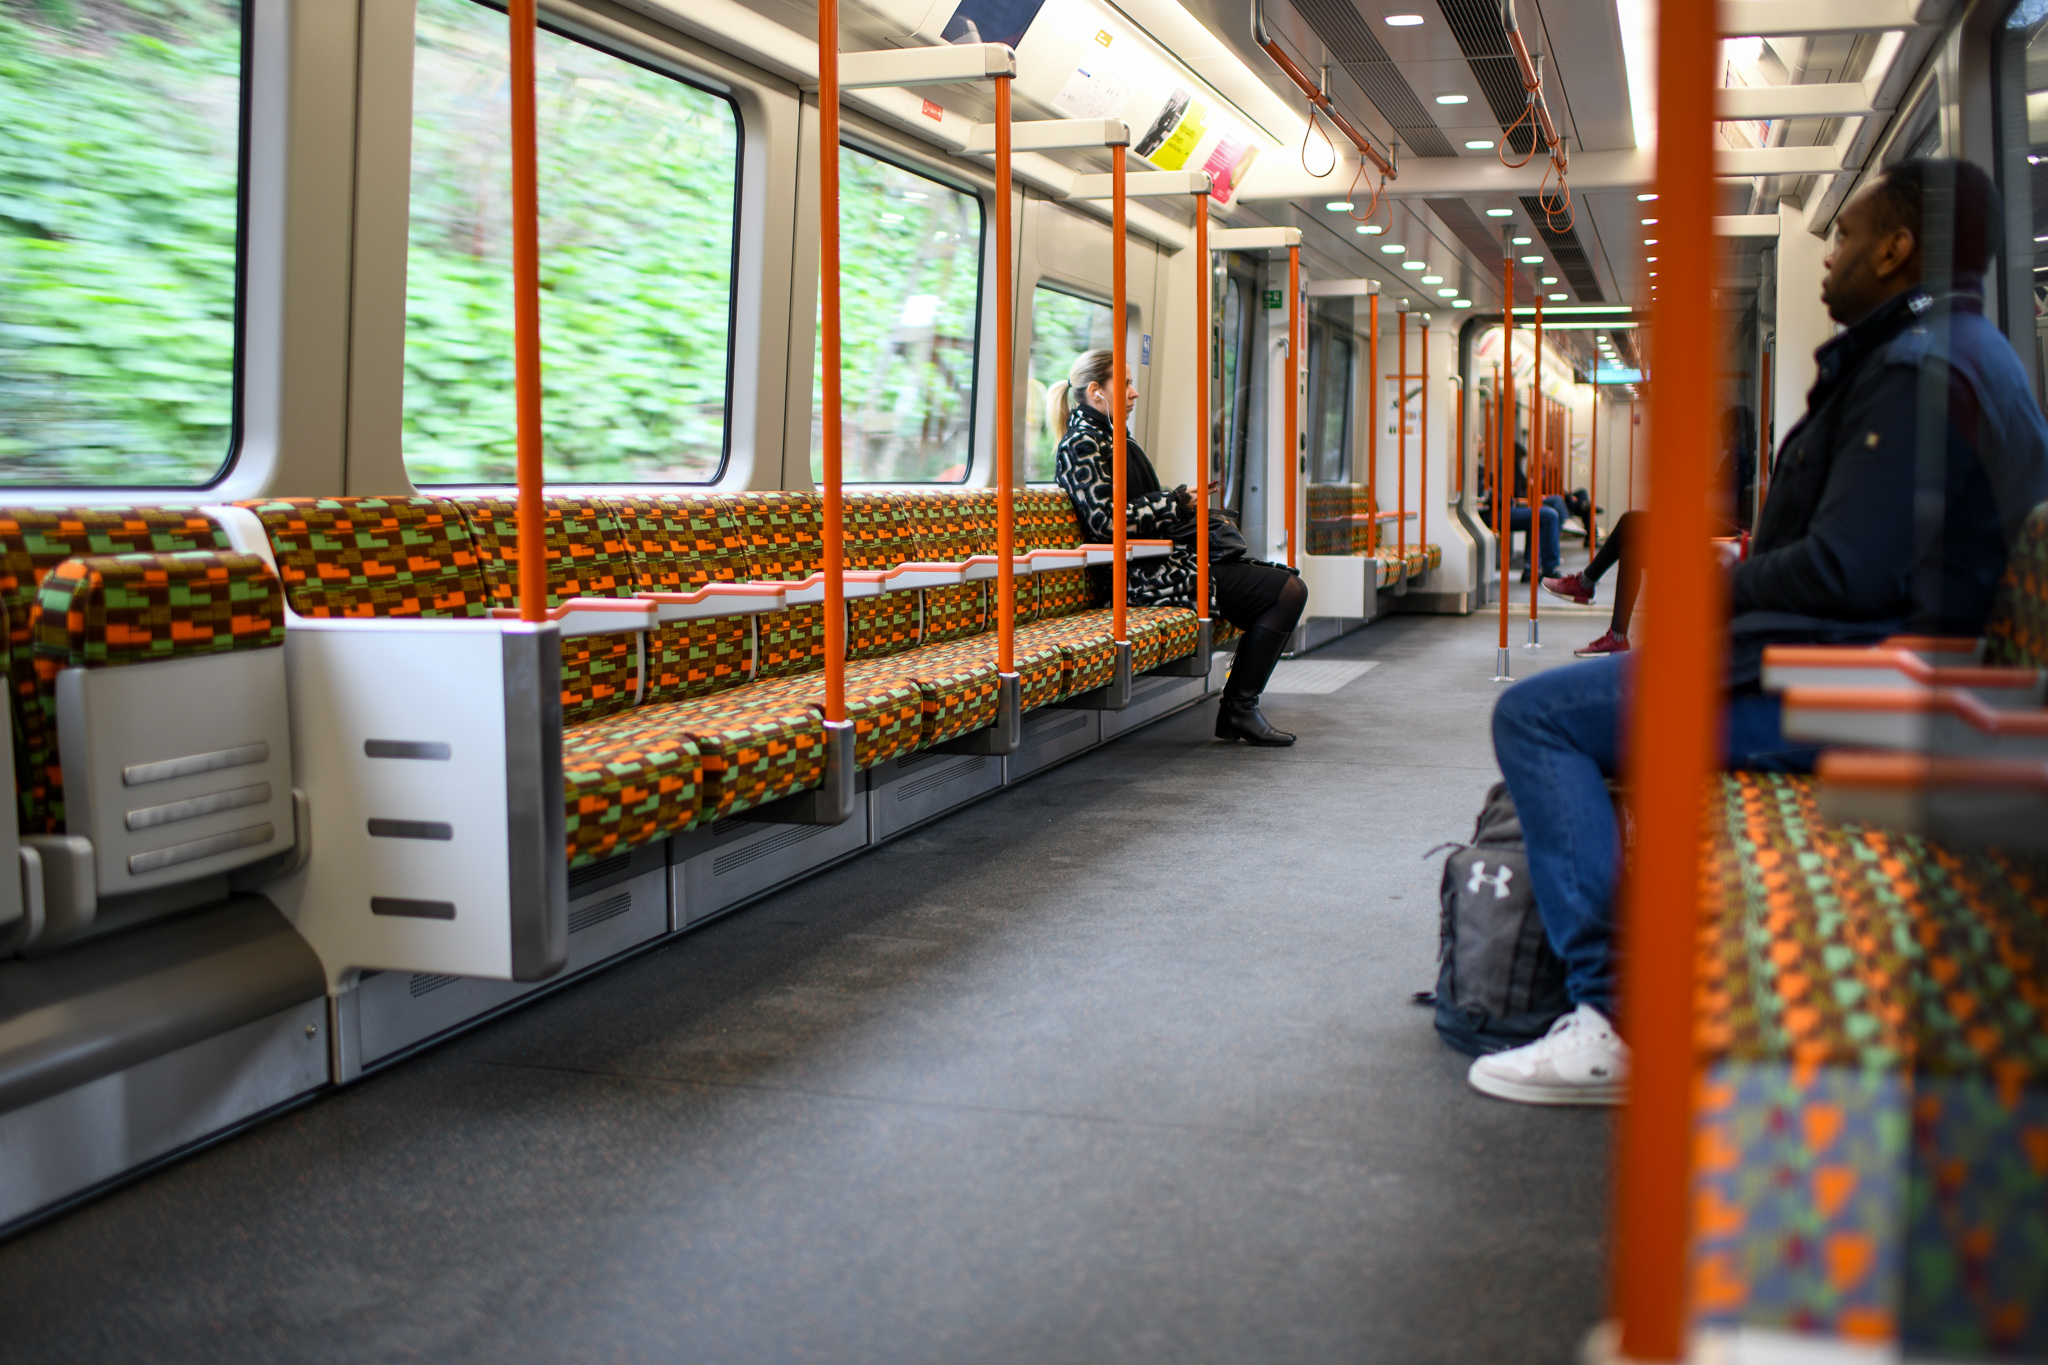 TfL Press Release - New London Overground trains enter service on routes  into London Liverpool Street